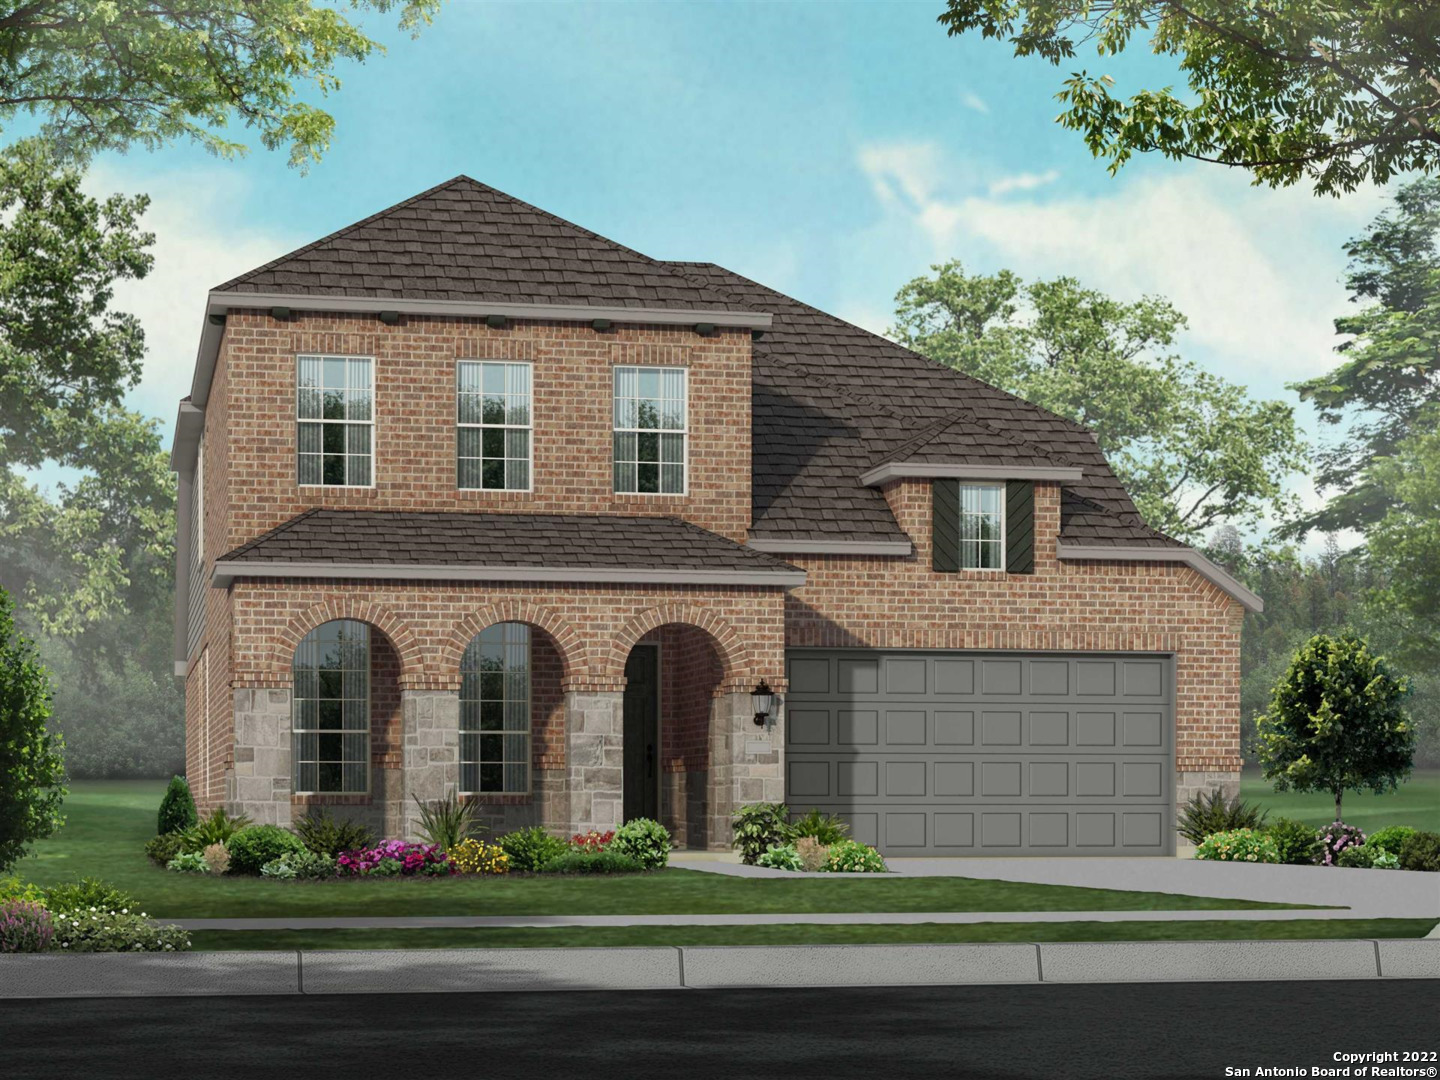 MLS# 1602908 - Built by Highland Homes - December completion! ~ This 2 story brick home is perfect for a family with the game and entertainment space upstairs! The home interior design palette is a neutral cream white with maple cabinets and porcelain tile floors in primary living areas!